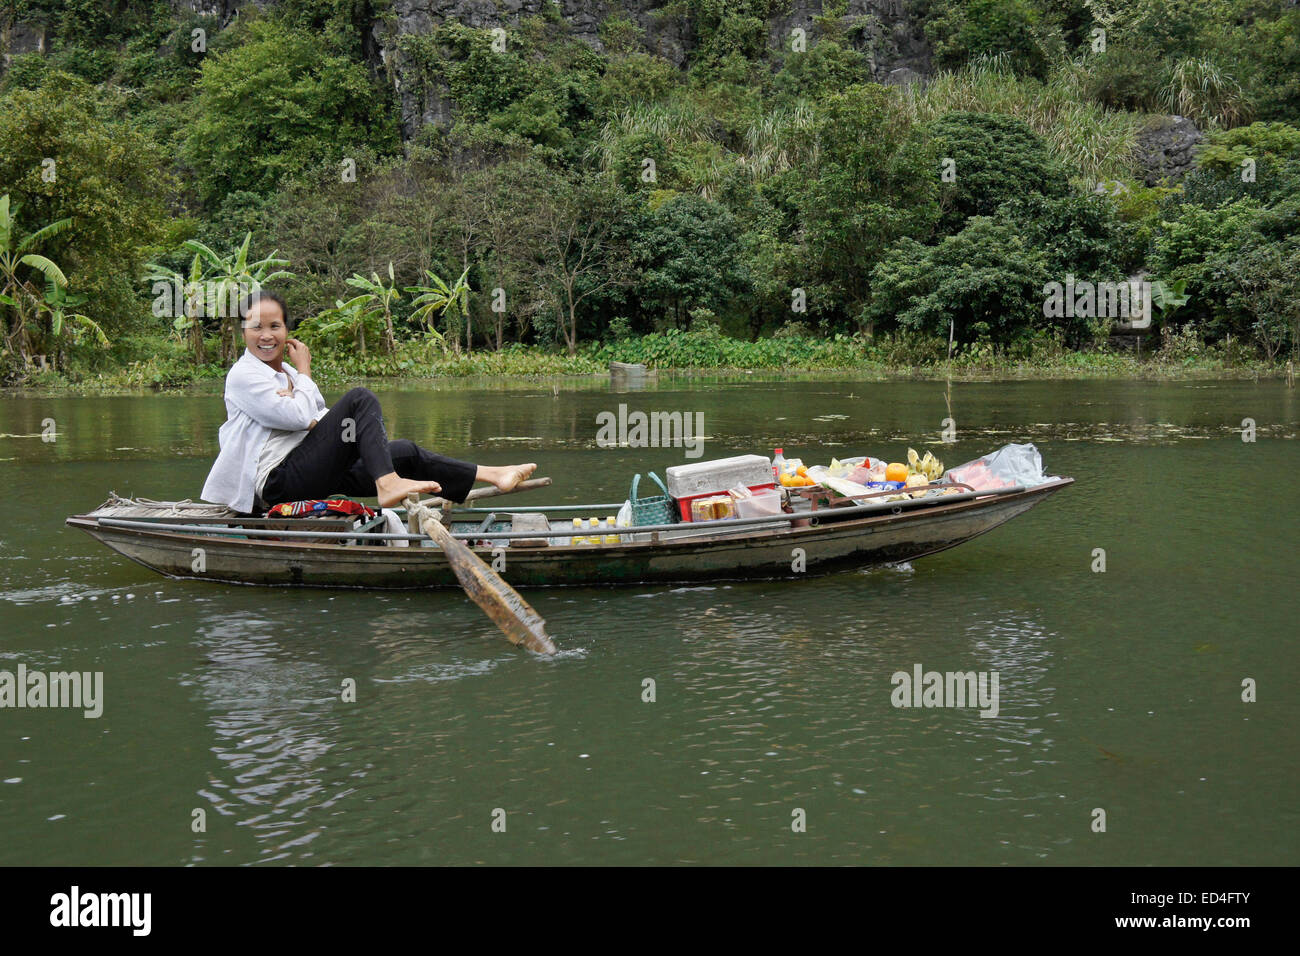 Woman rowing boat with feet, Ngo Dong River, Tam Coc, Vietnam Stock Photo